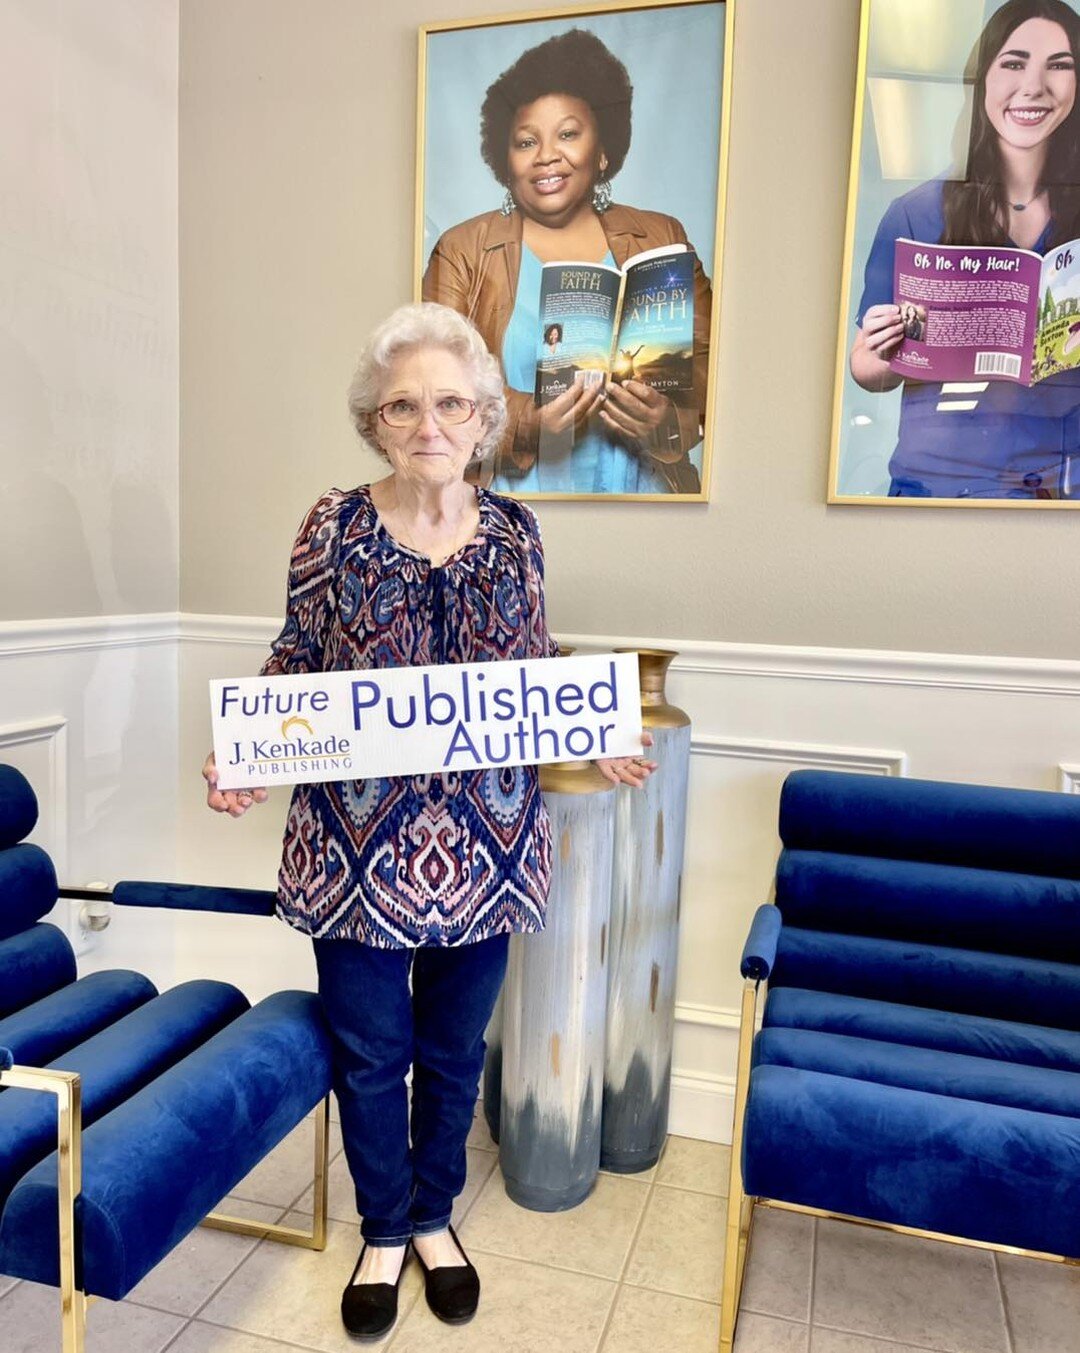 We love when our authors come in to get started on their publishing journey!! This way, we get to show them off!! 🎉

Get started on your author journey in person or online! 

Help us welcome one of our newest future authors, Mrs. Rosette Cleghorn! W